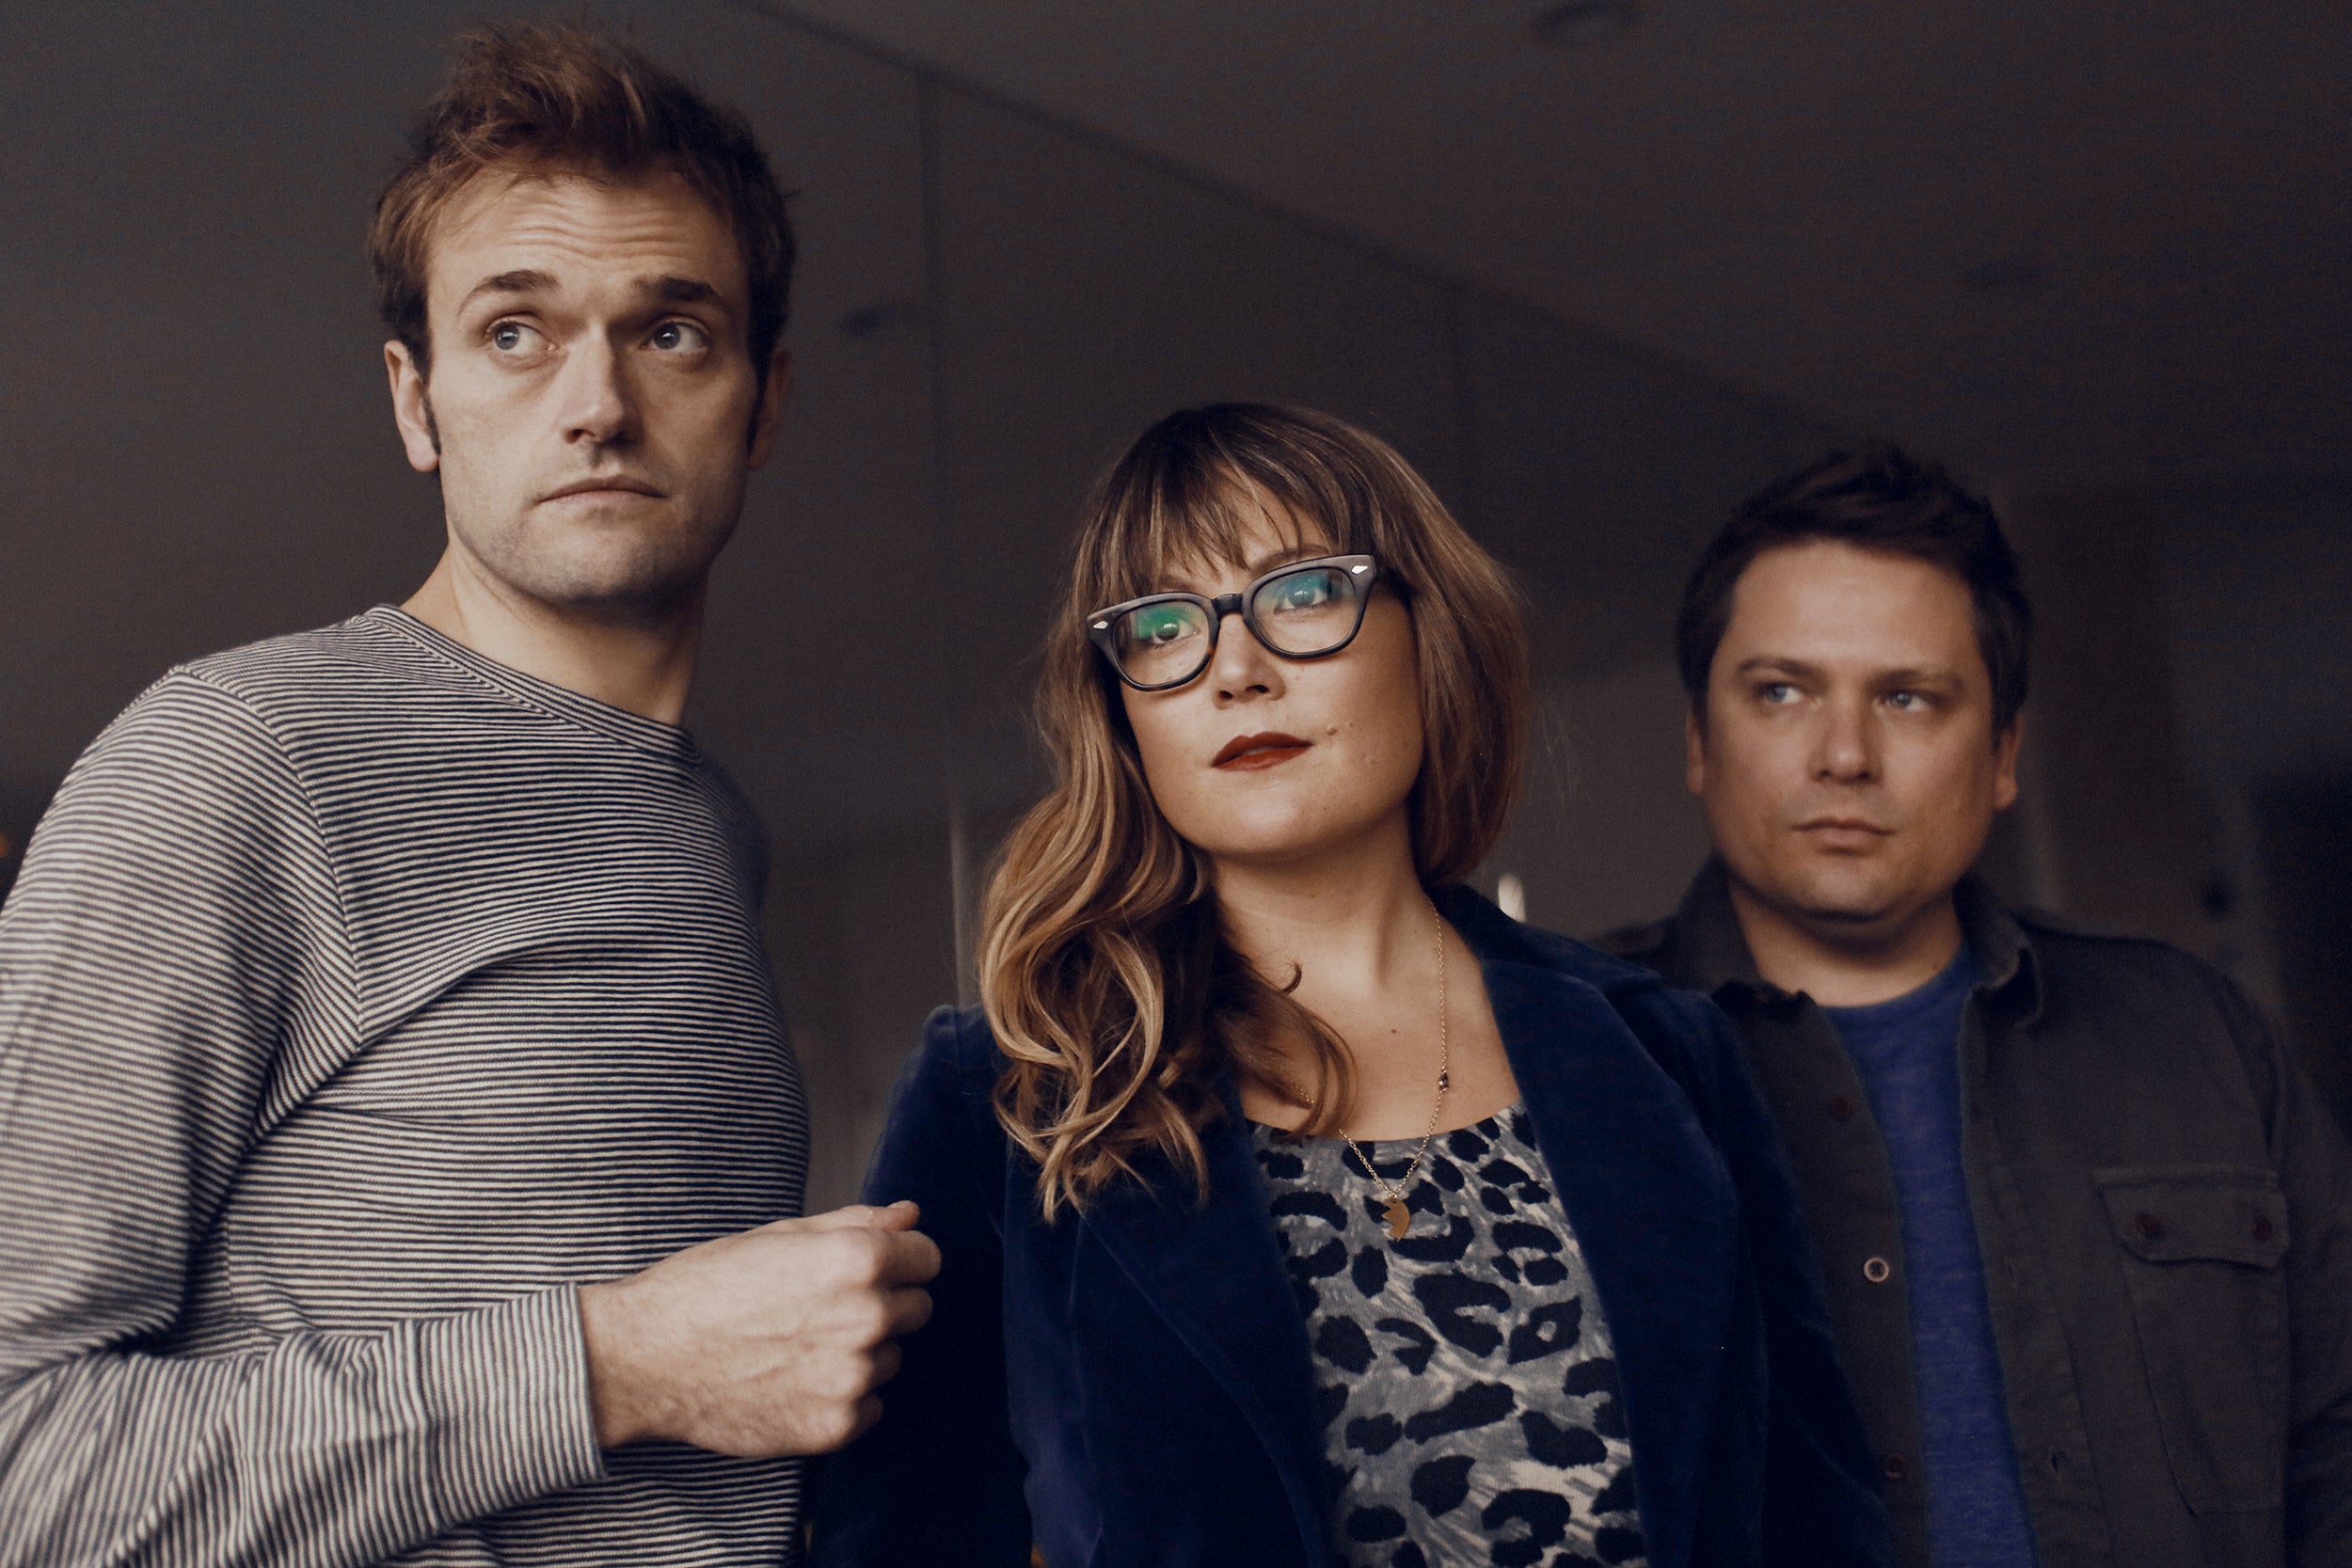 Nickel Creek with special guest Gaby Moreno at The Hall